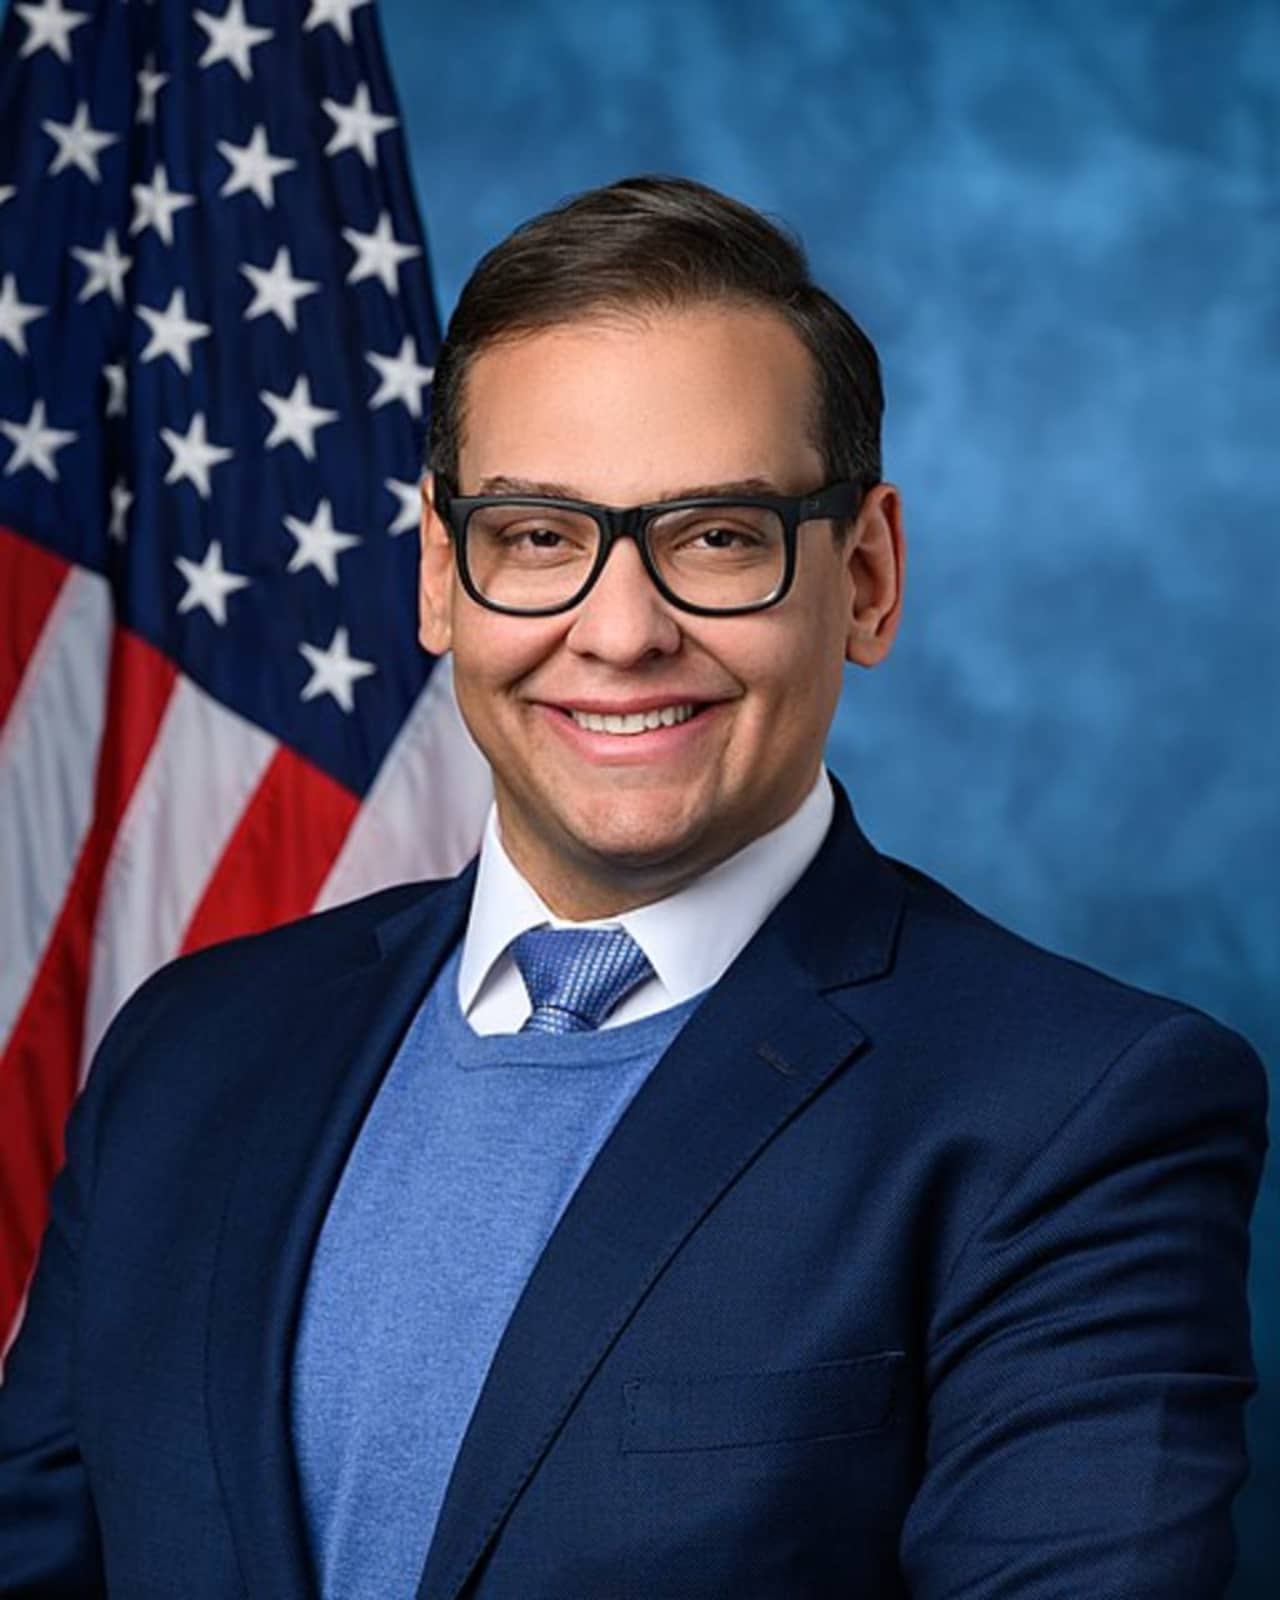 George Santos in his official US House of Representatives photo taken shortly after he was sworn into office.